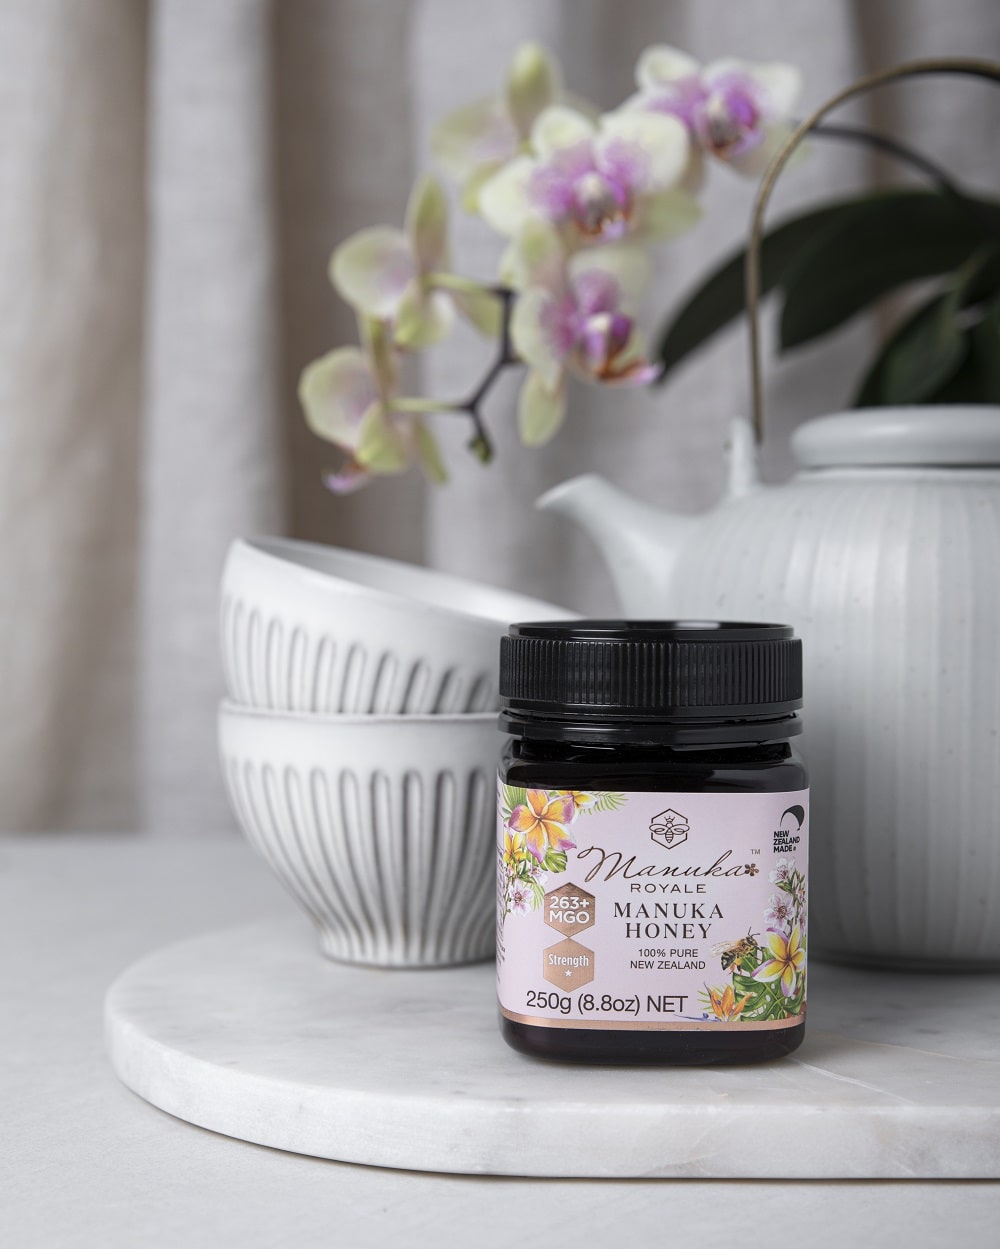 MANUKA HONEY IS IN THE SPOTLIGHT, FOR ALL THE BEST REASONS